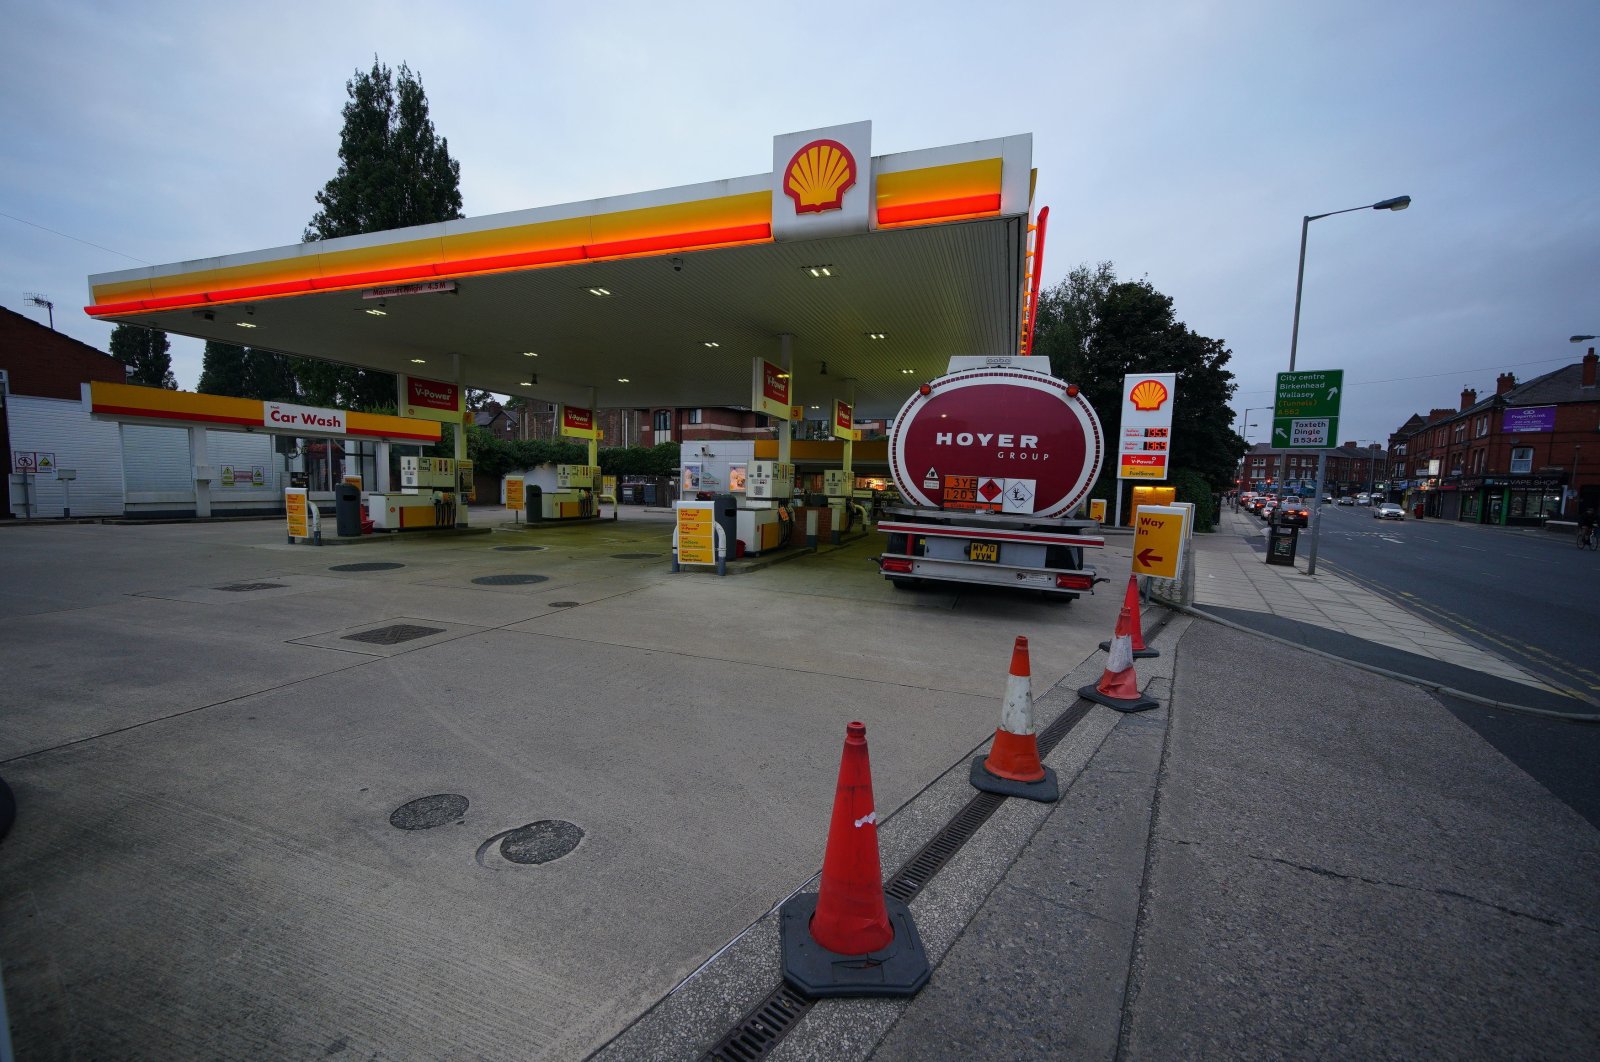 A petrol tanker delivers fuel to a gas station that was closed due to having no fuel, in Liverpool, England, Sept. 23, 2021. (Peter Byrne / PA via AP)